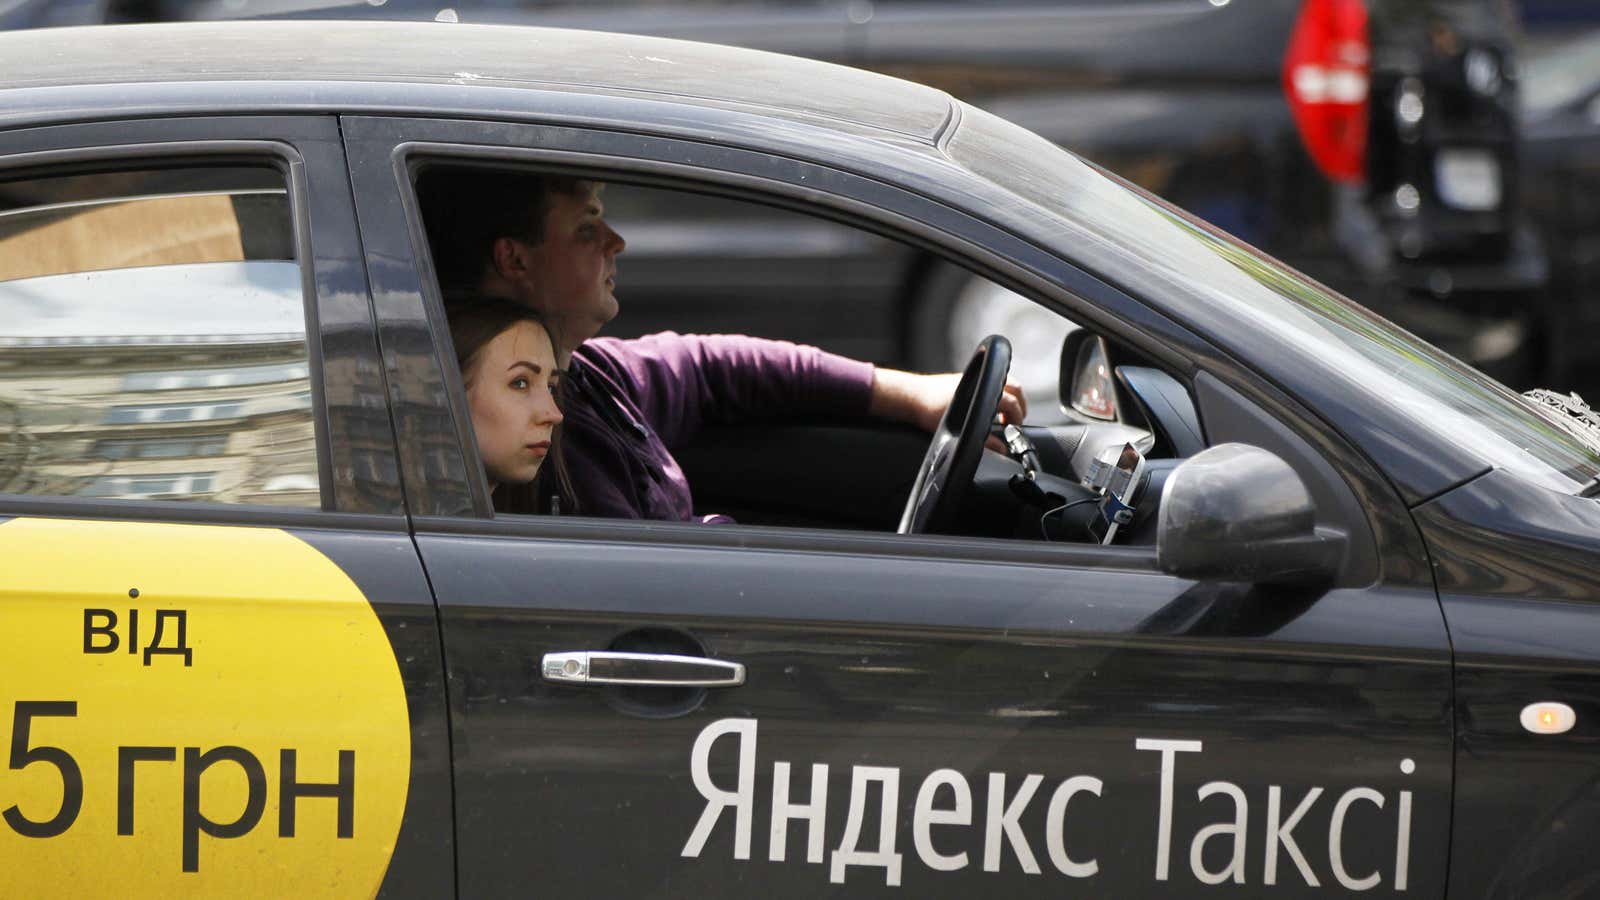 Yandex.Taxi bested Uber, but it didn’t come cheaply.